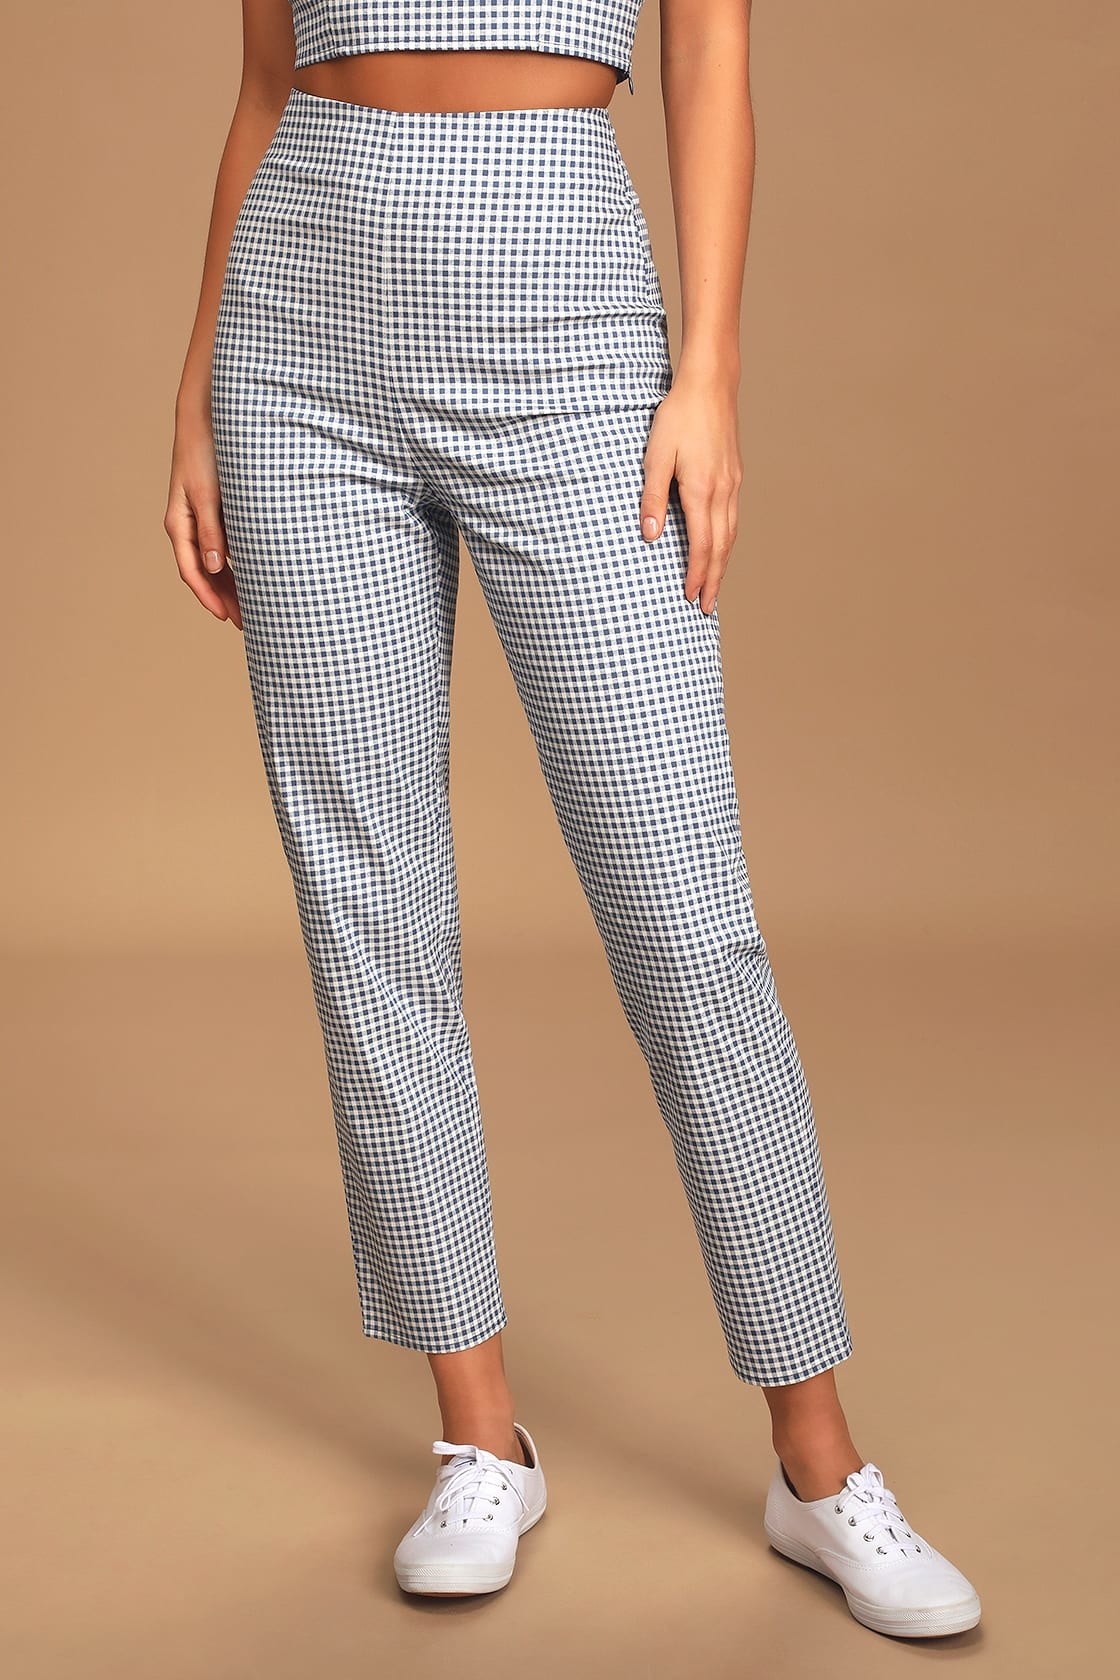 Model wearing blue and white checkered high waisted pant with white sneakers